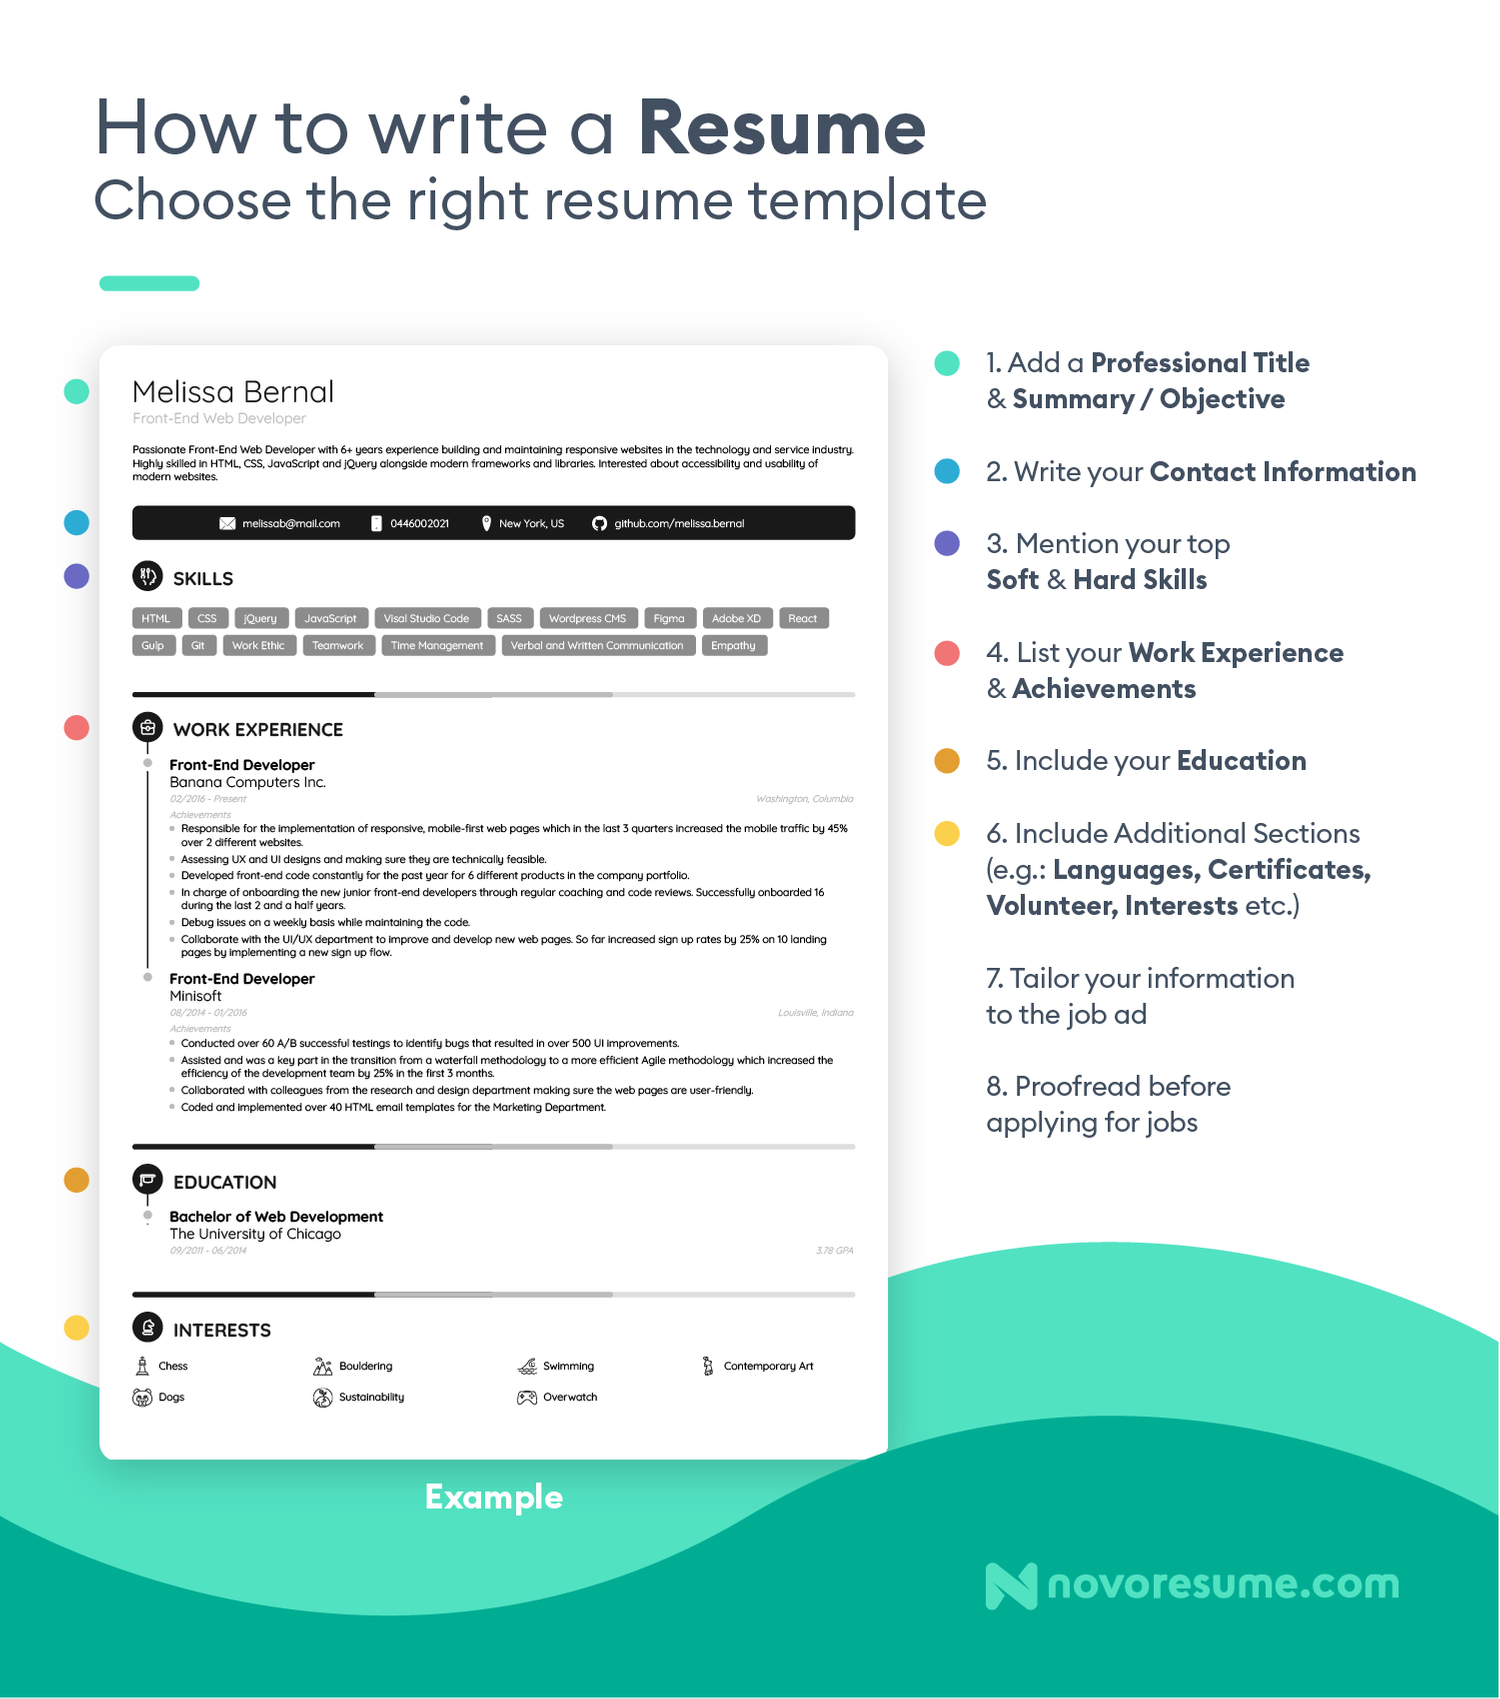 Incredible To Write Your Own Resume Or Not? 2022